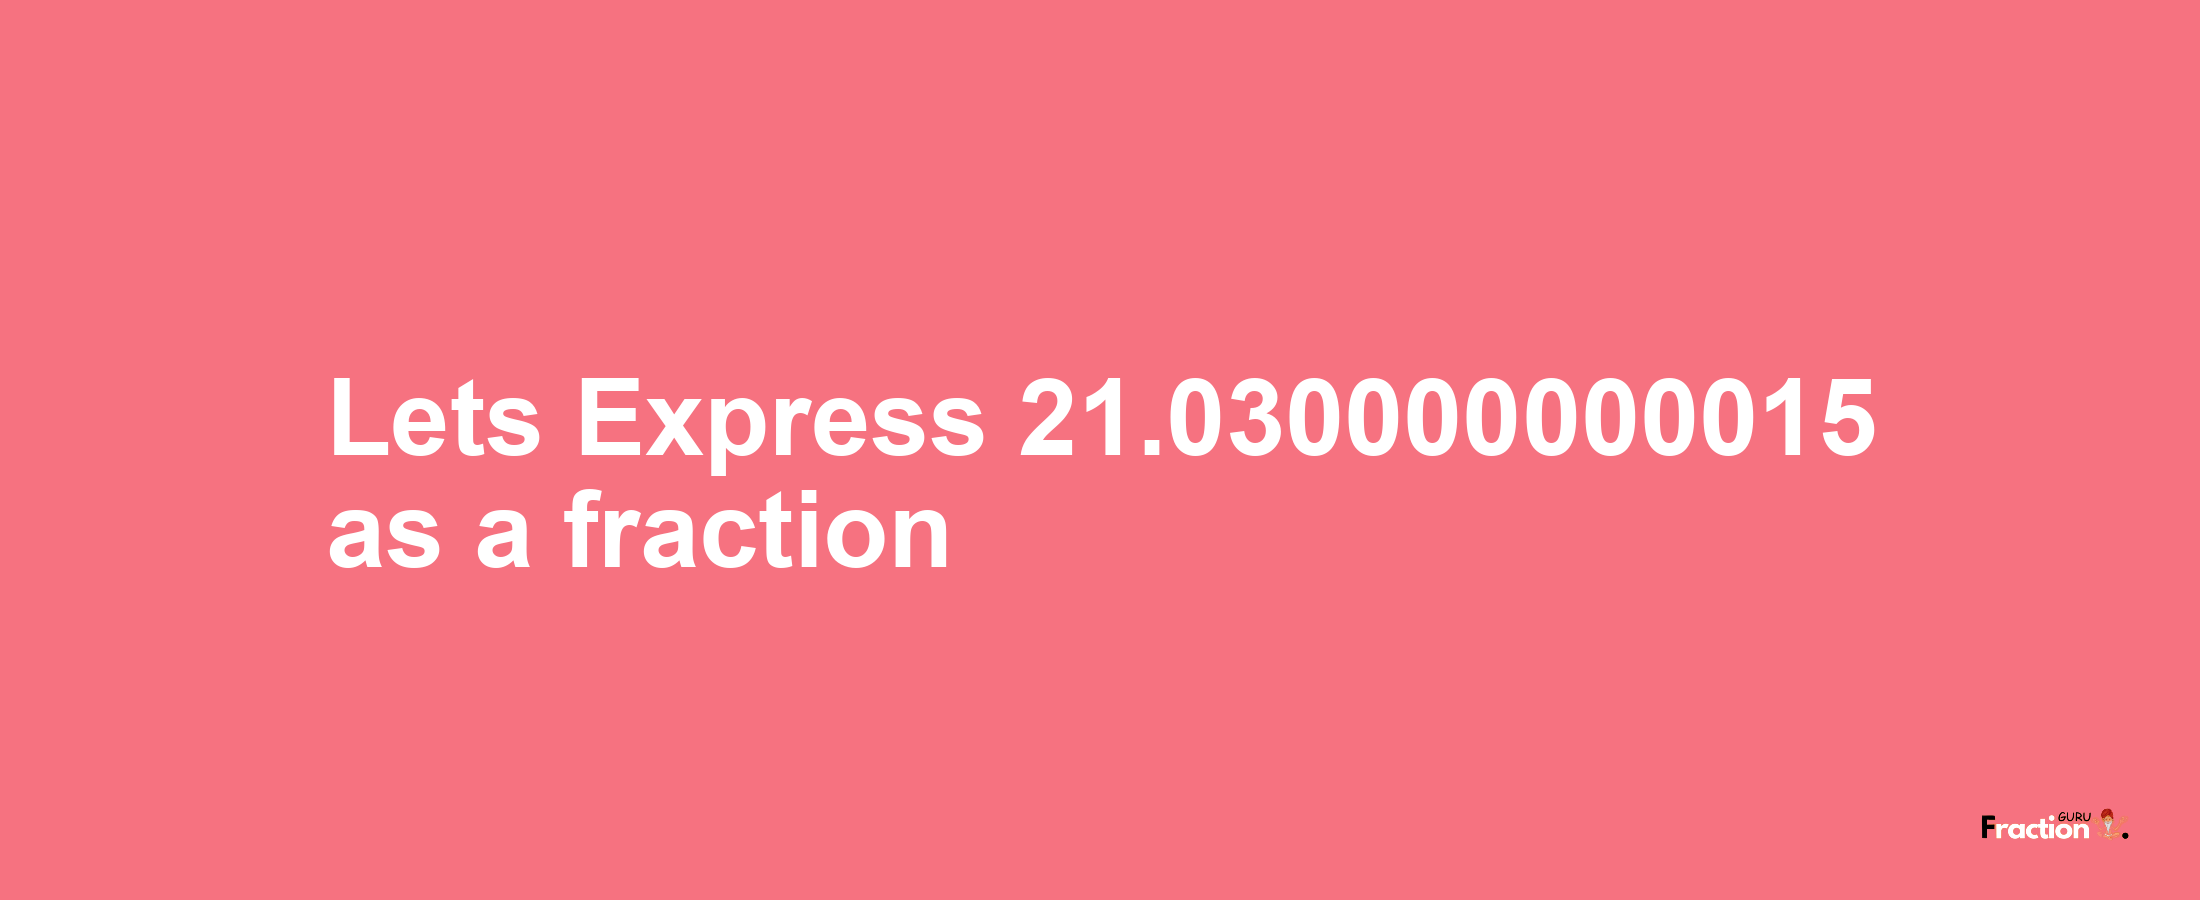 Lets Express 21.030000000015 as afraction